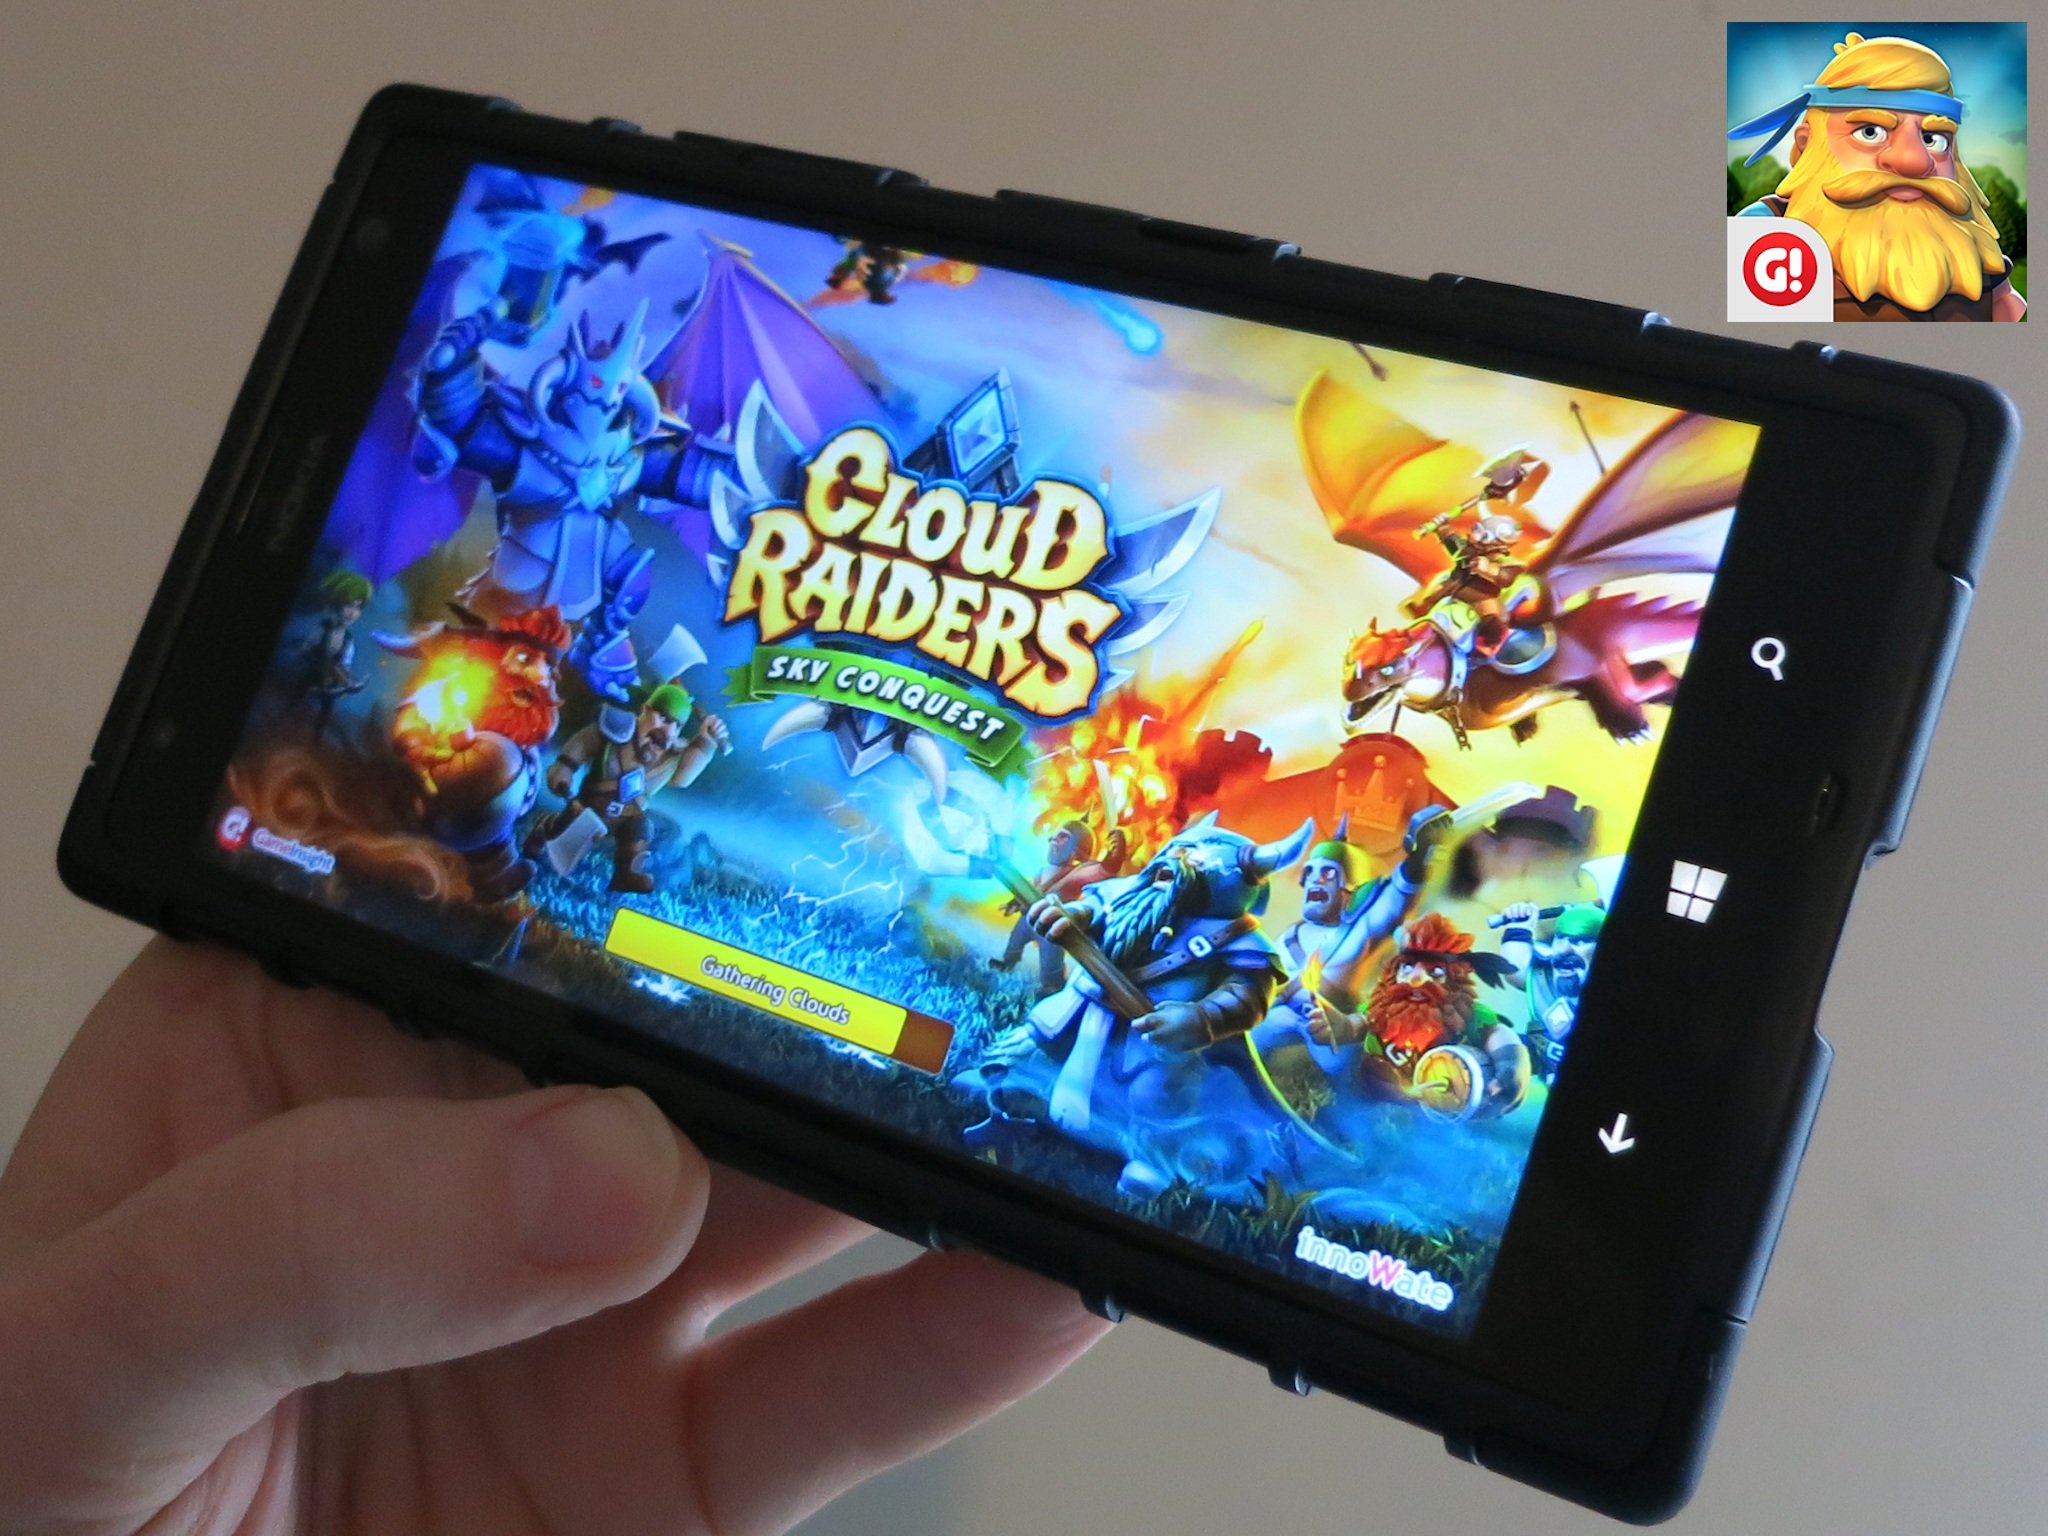 Cloud Raiders unleashes PvP clashes on Windows Phone